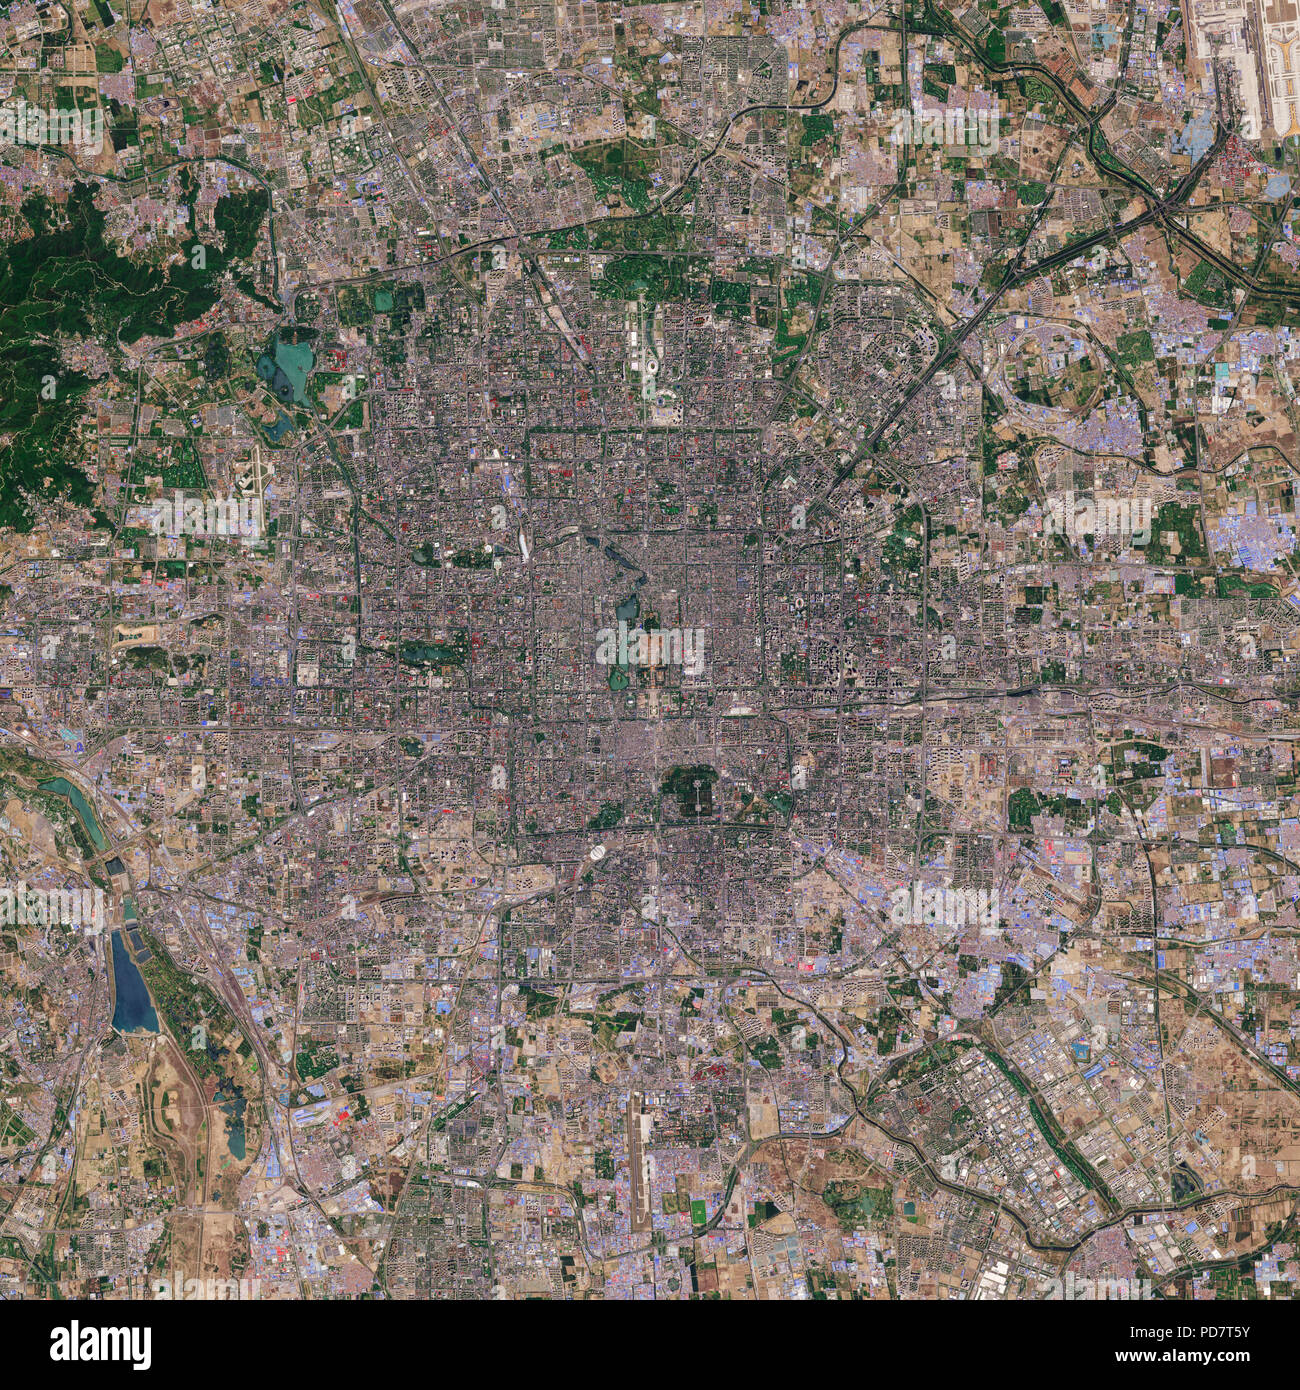 Bejing, the capital of China, seen from space - contains modified Copernicus Sentinel Data 2018 Stock Photo